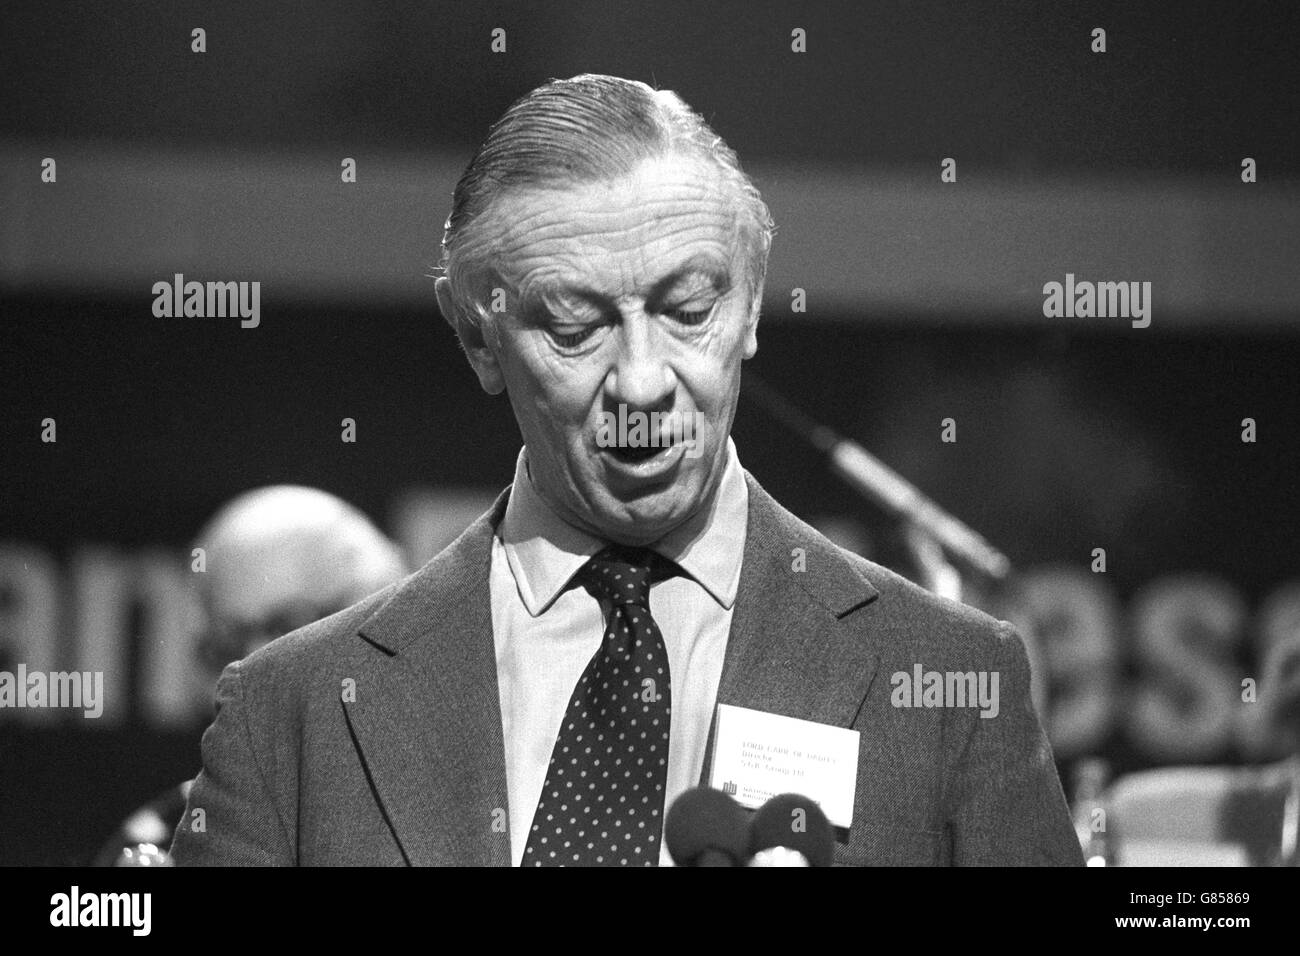 Lord Carr of Hadley speaks at the Confederation of British Industry's annual conference in Brighton. Stock Photo